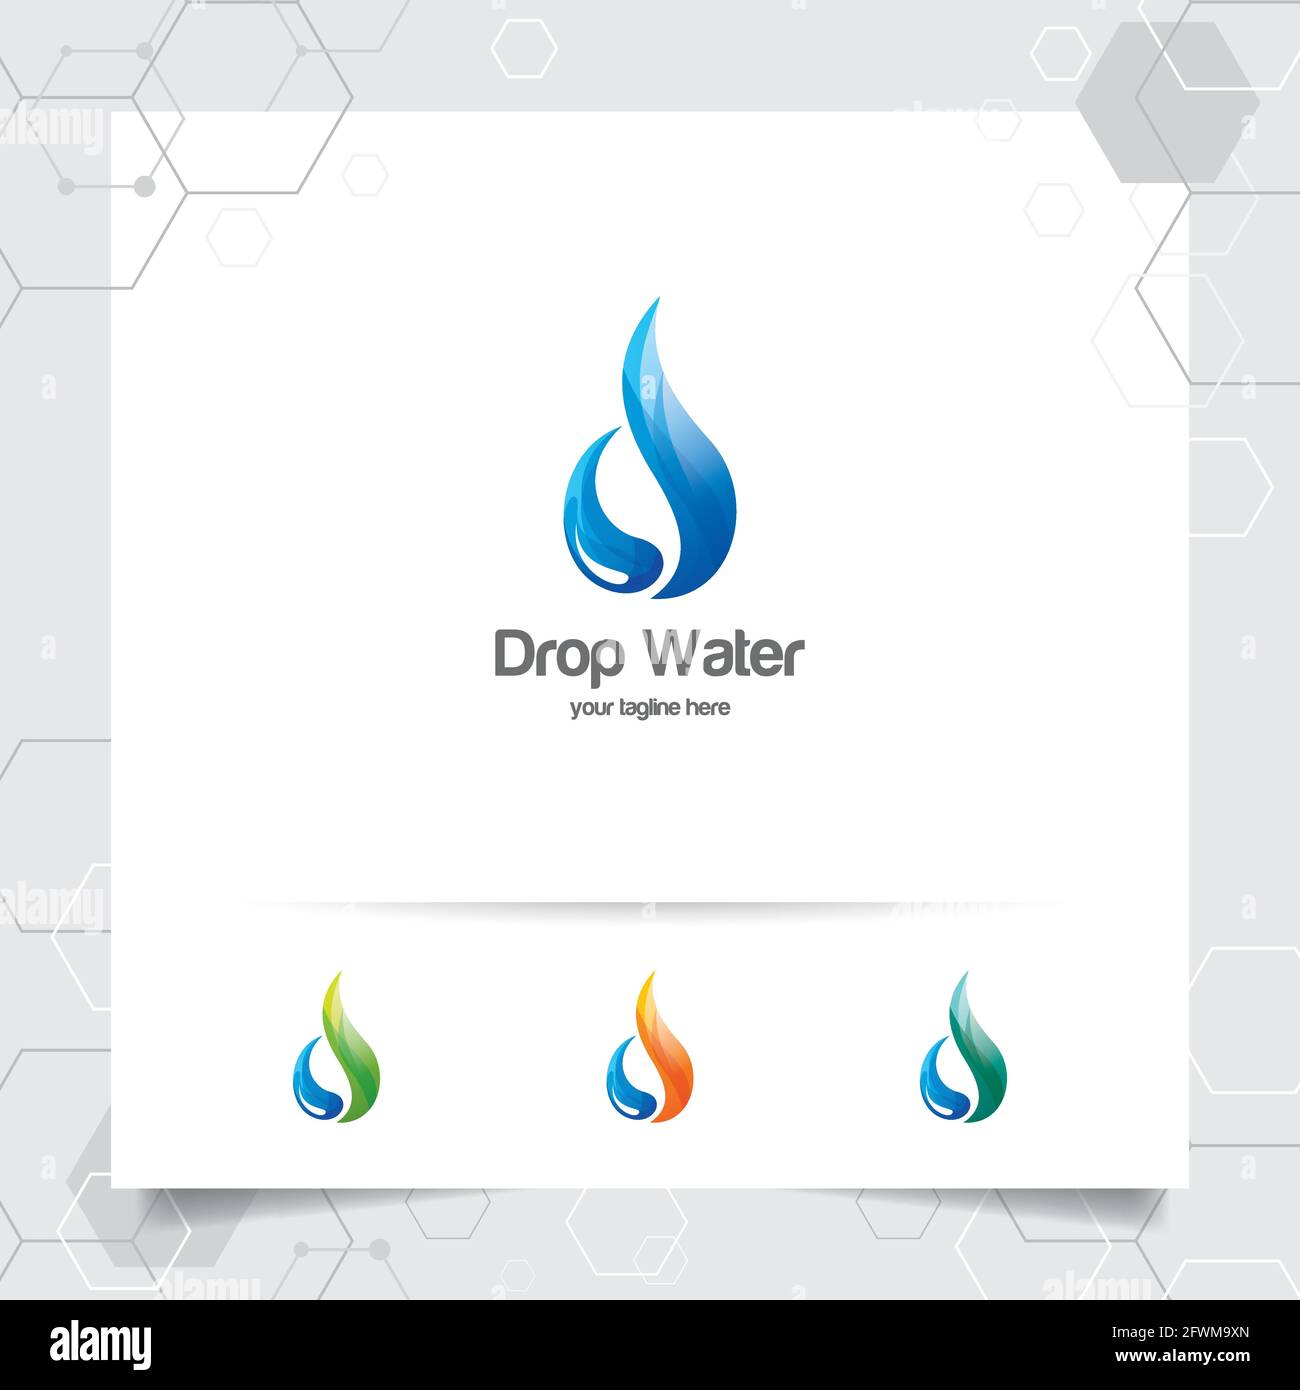 Drop water logo design with concept of droplet icon and splash water vector used for mineral water company and plumbing. Stock Vector